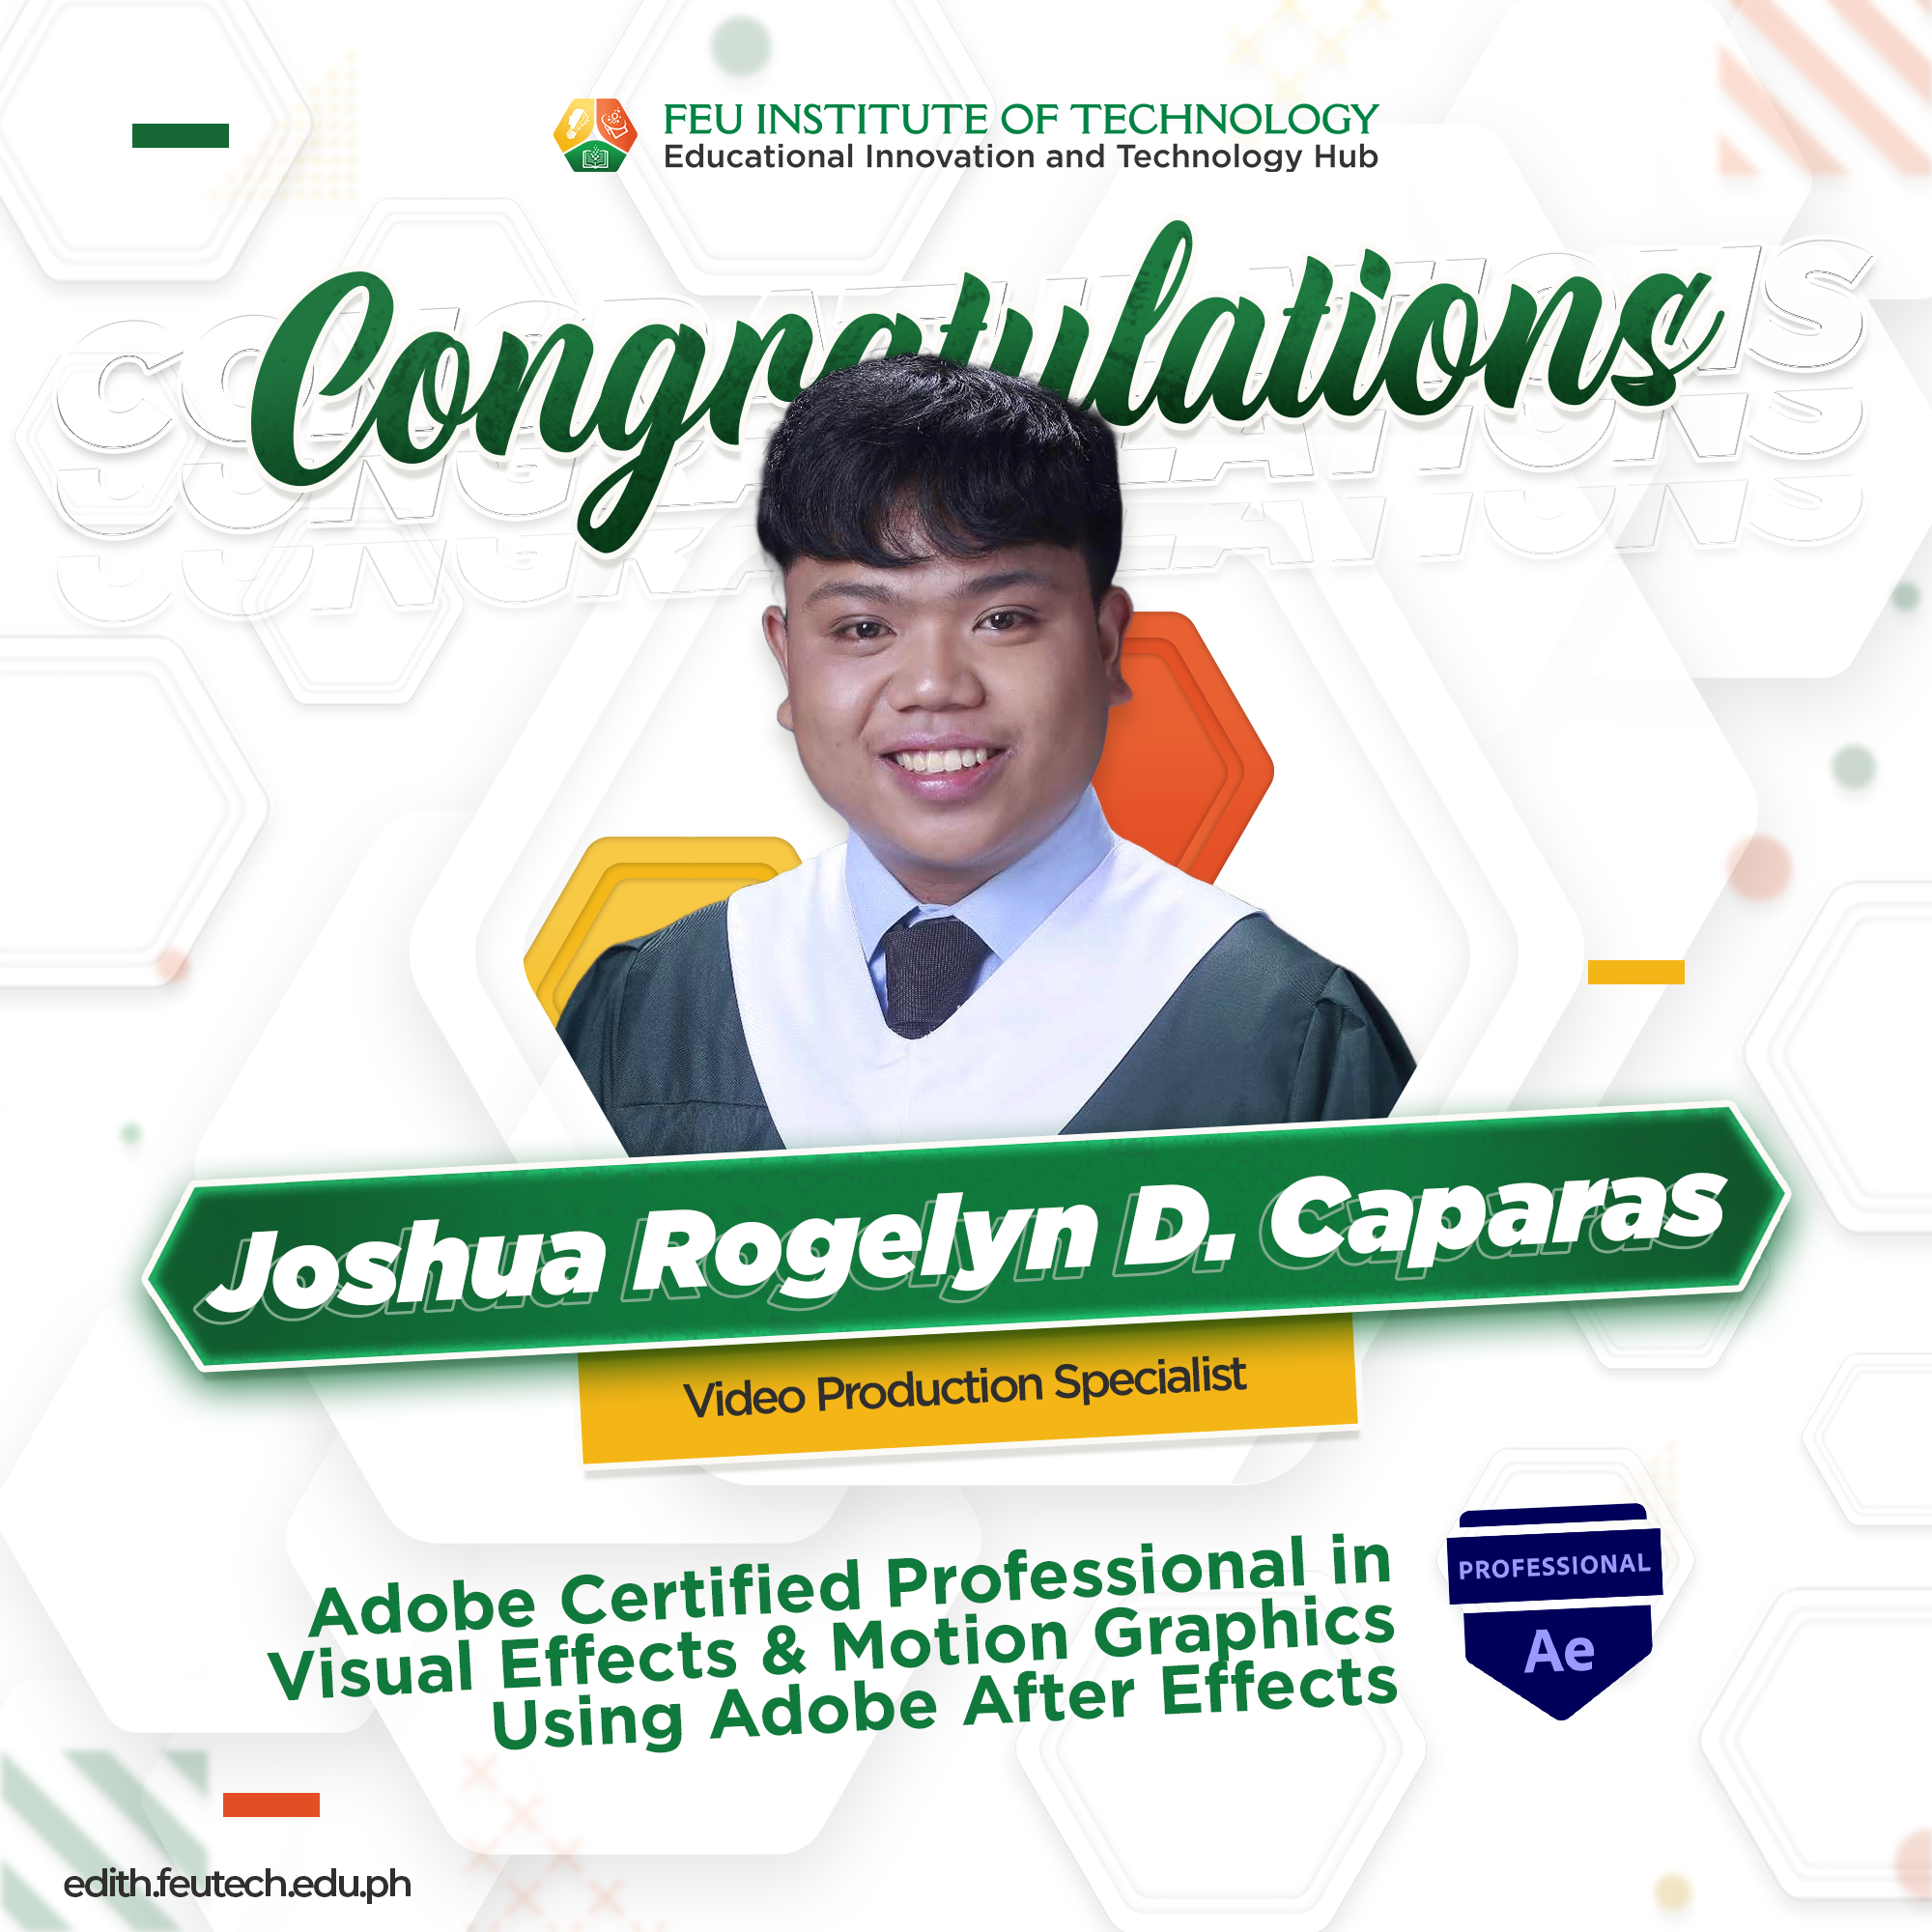 Joshua Rogelyn D. Caparas is now an Adobe Certified Professional in Visual Effects & Motion Graphics Using Adobe After Effects